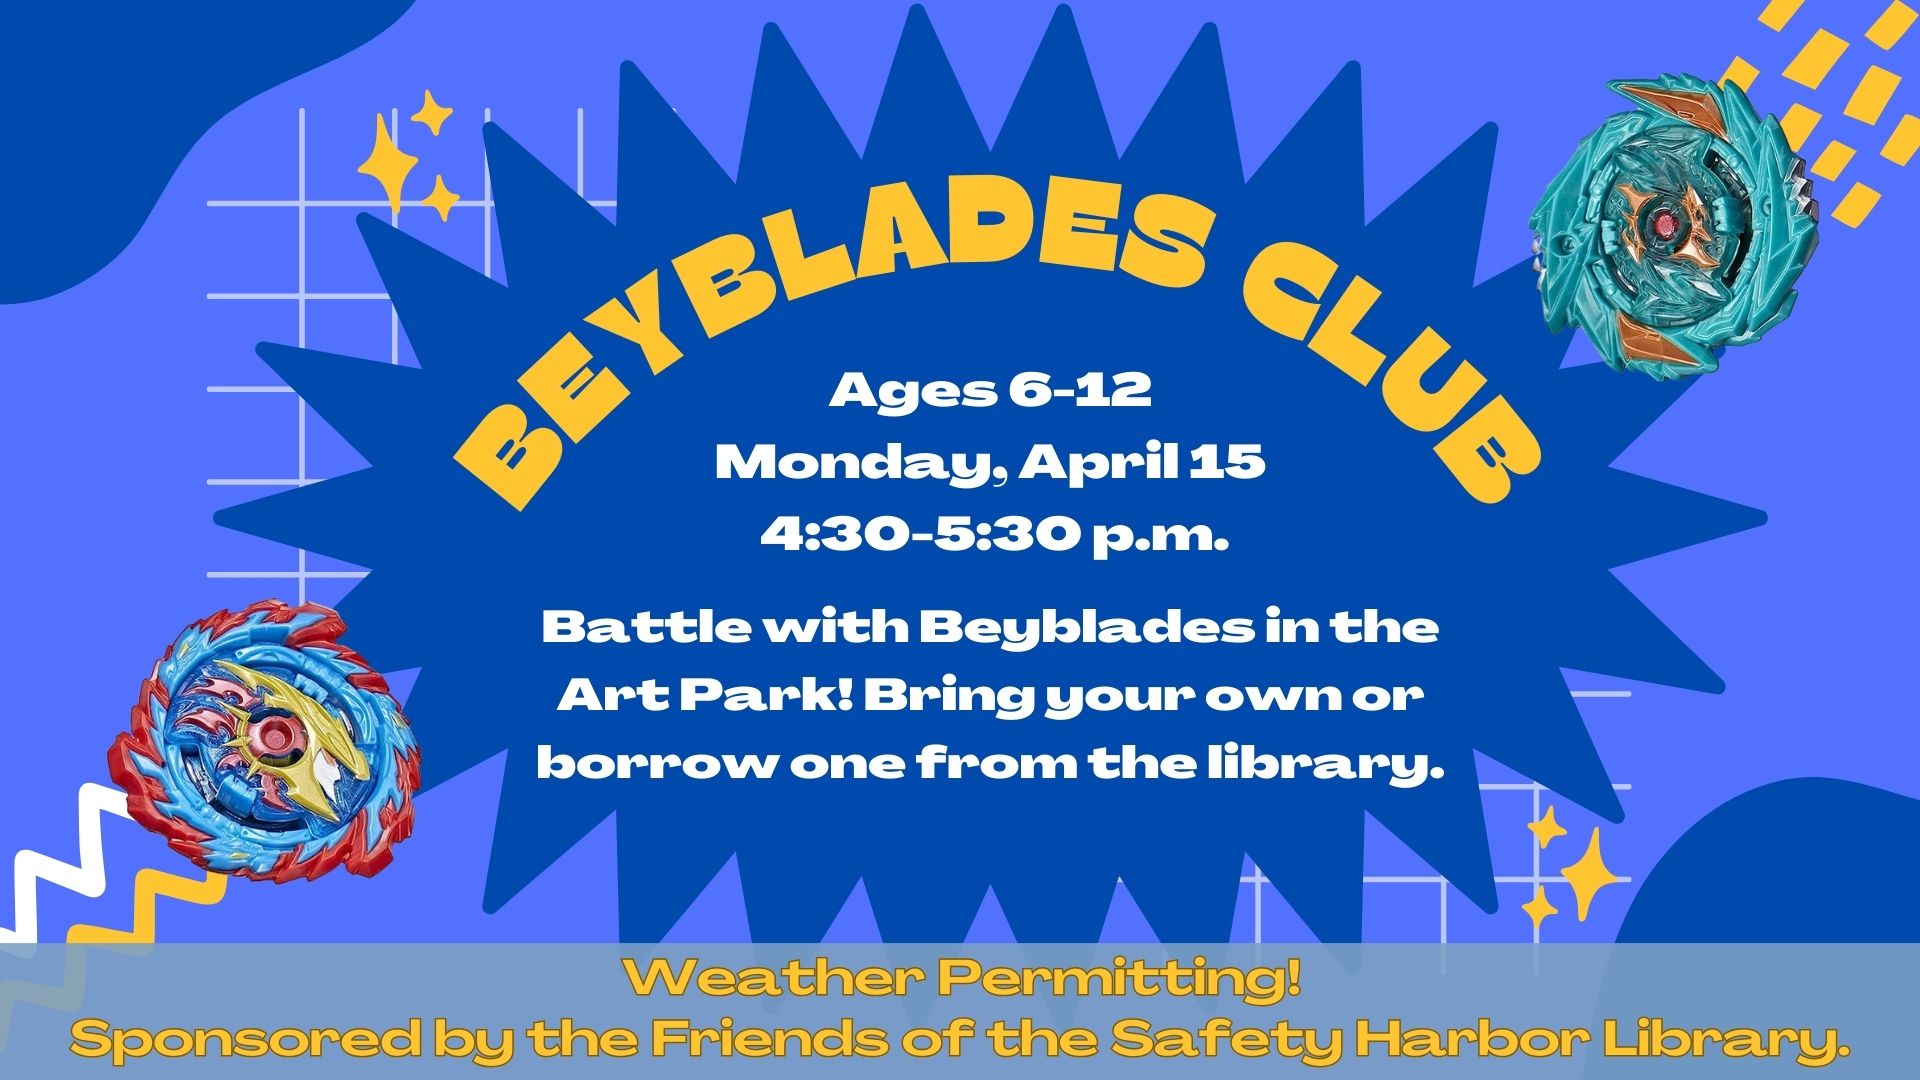 Beyblades Club in the Art Park with two beyblades on the image. 